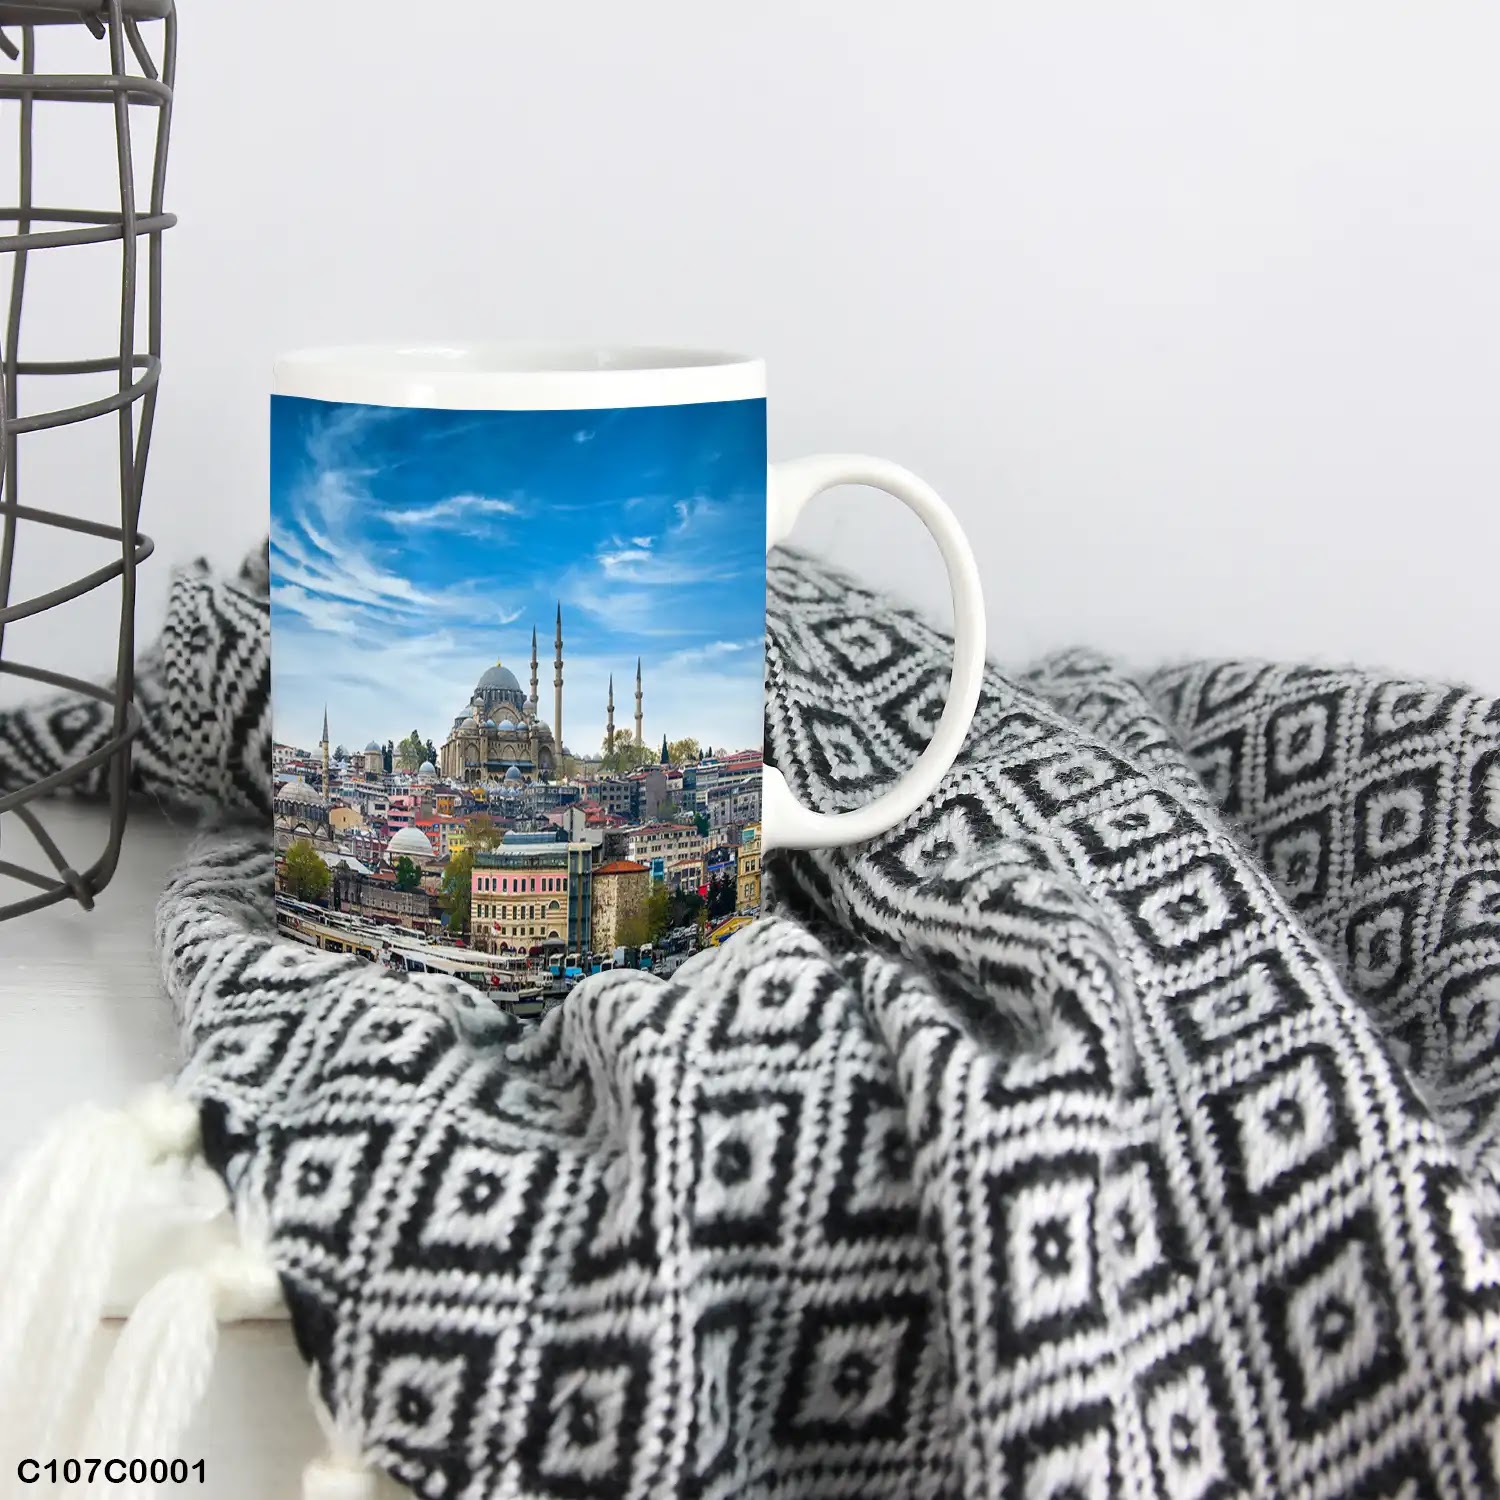 A mug (cup) printed with an image of Sultan Ahmed Mosque